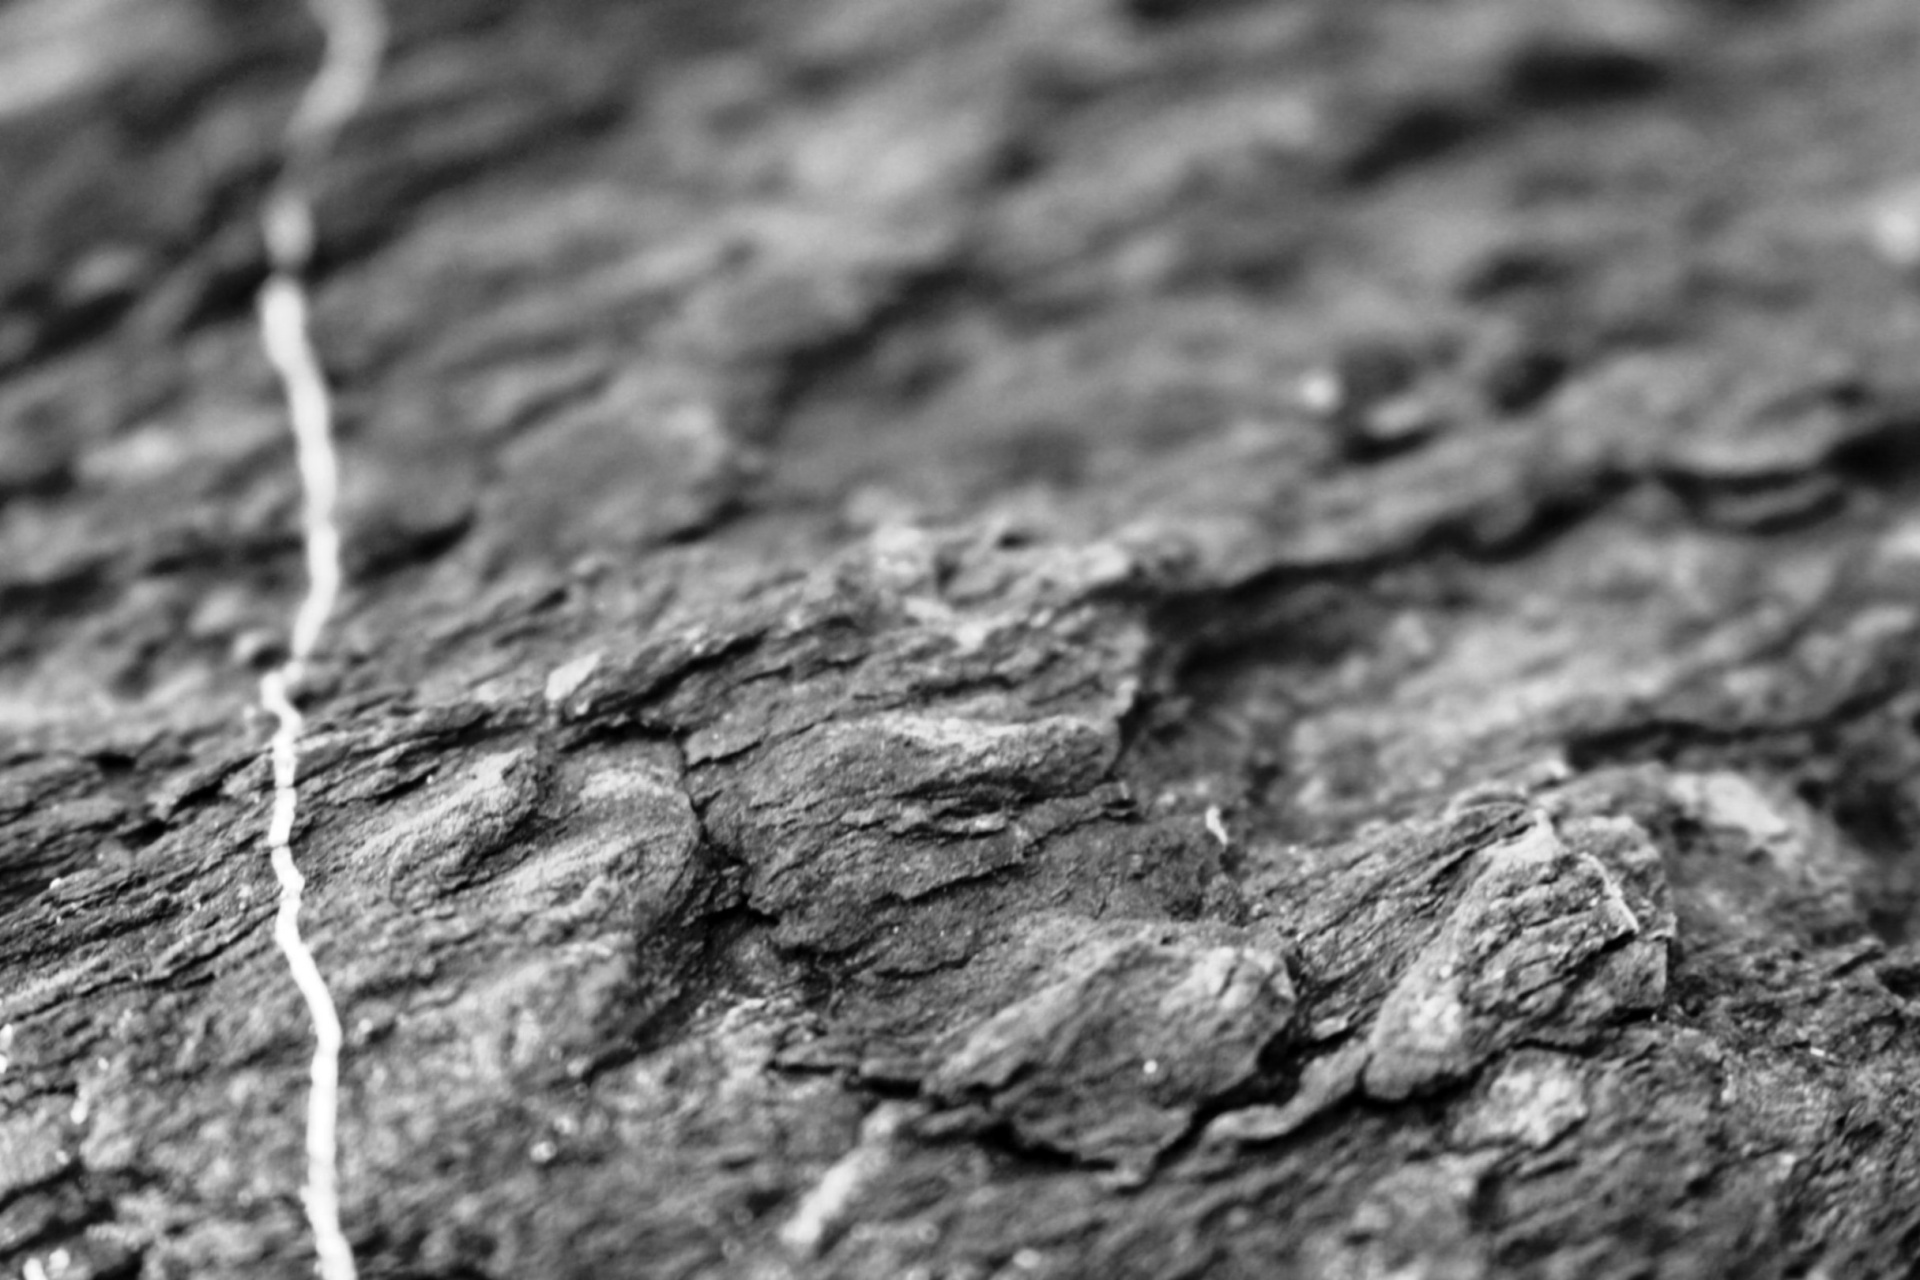 Grey Rock Texture With White Veins